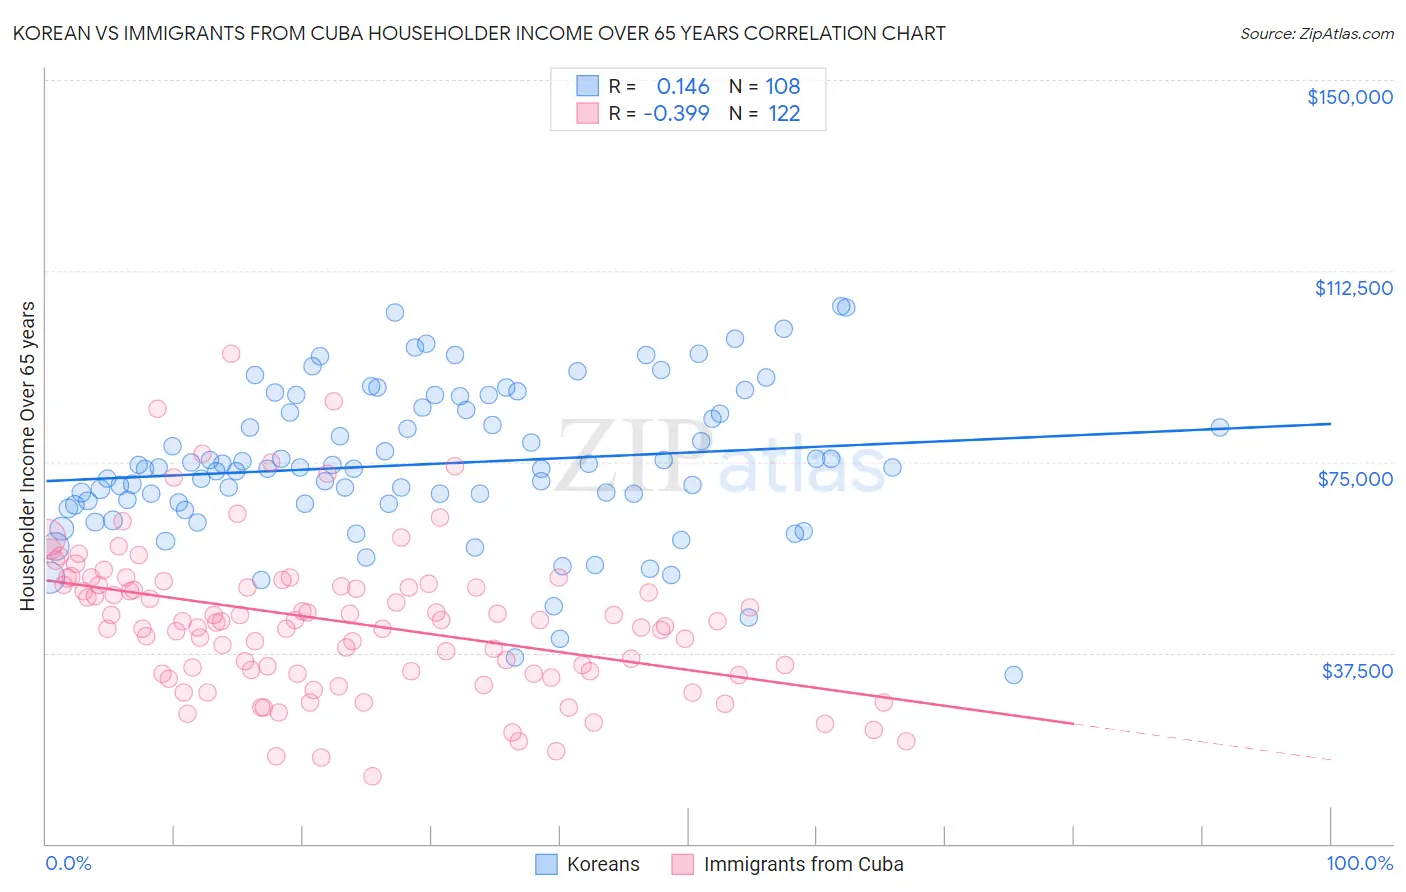 Korean vs Immigrants from Cuba Householder Income Over 65 years